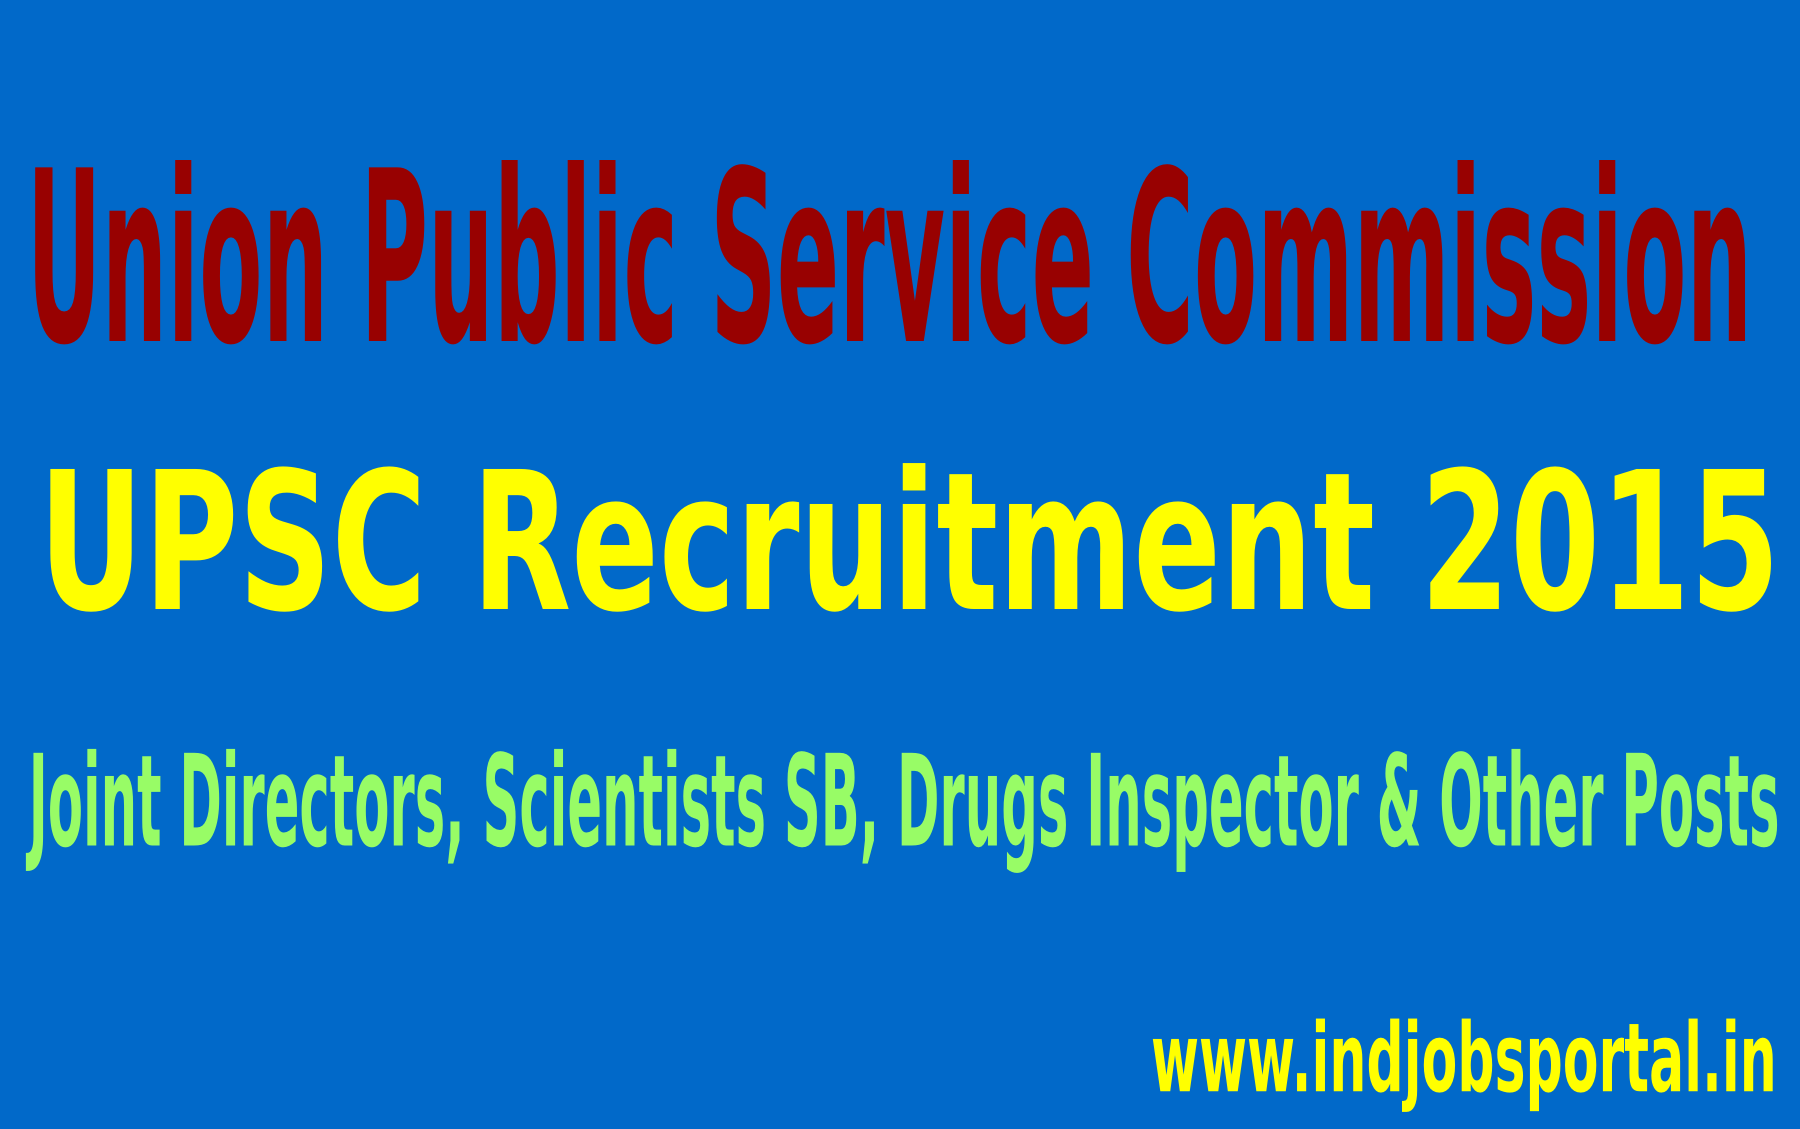 UPSC Recruitment 2015 For 173 Joint Directors, Scientists SB, Drugs Inspector & Other Posts